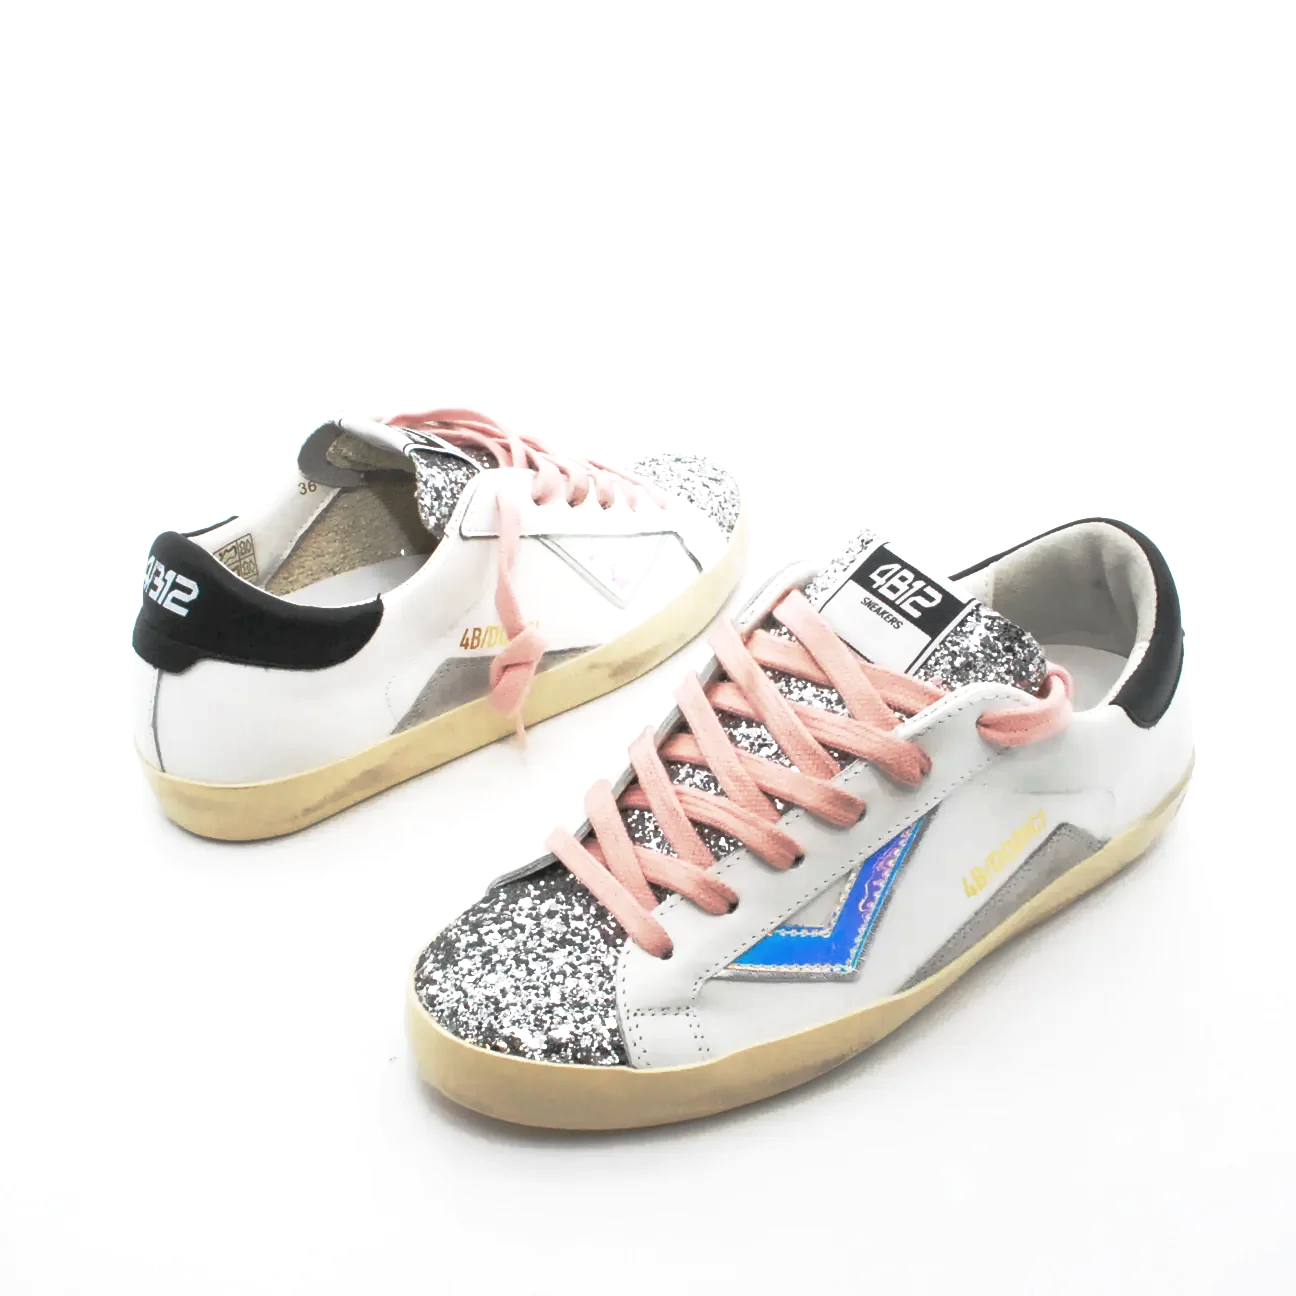 sneakers-4b12-suprime-in-pelle-sneakers-2_4d8e5646-a1c5-46b4-bf36-074d242f5973.png